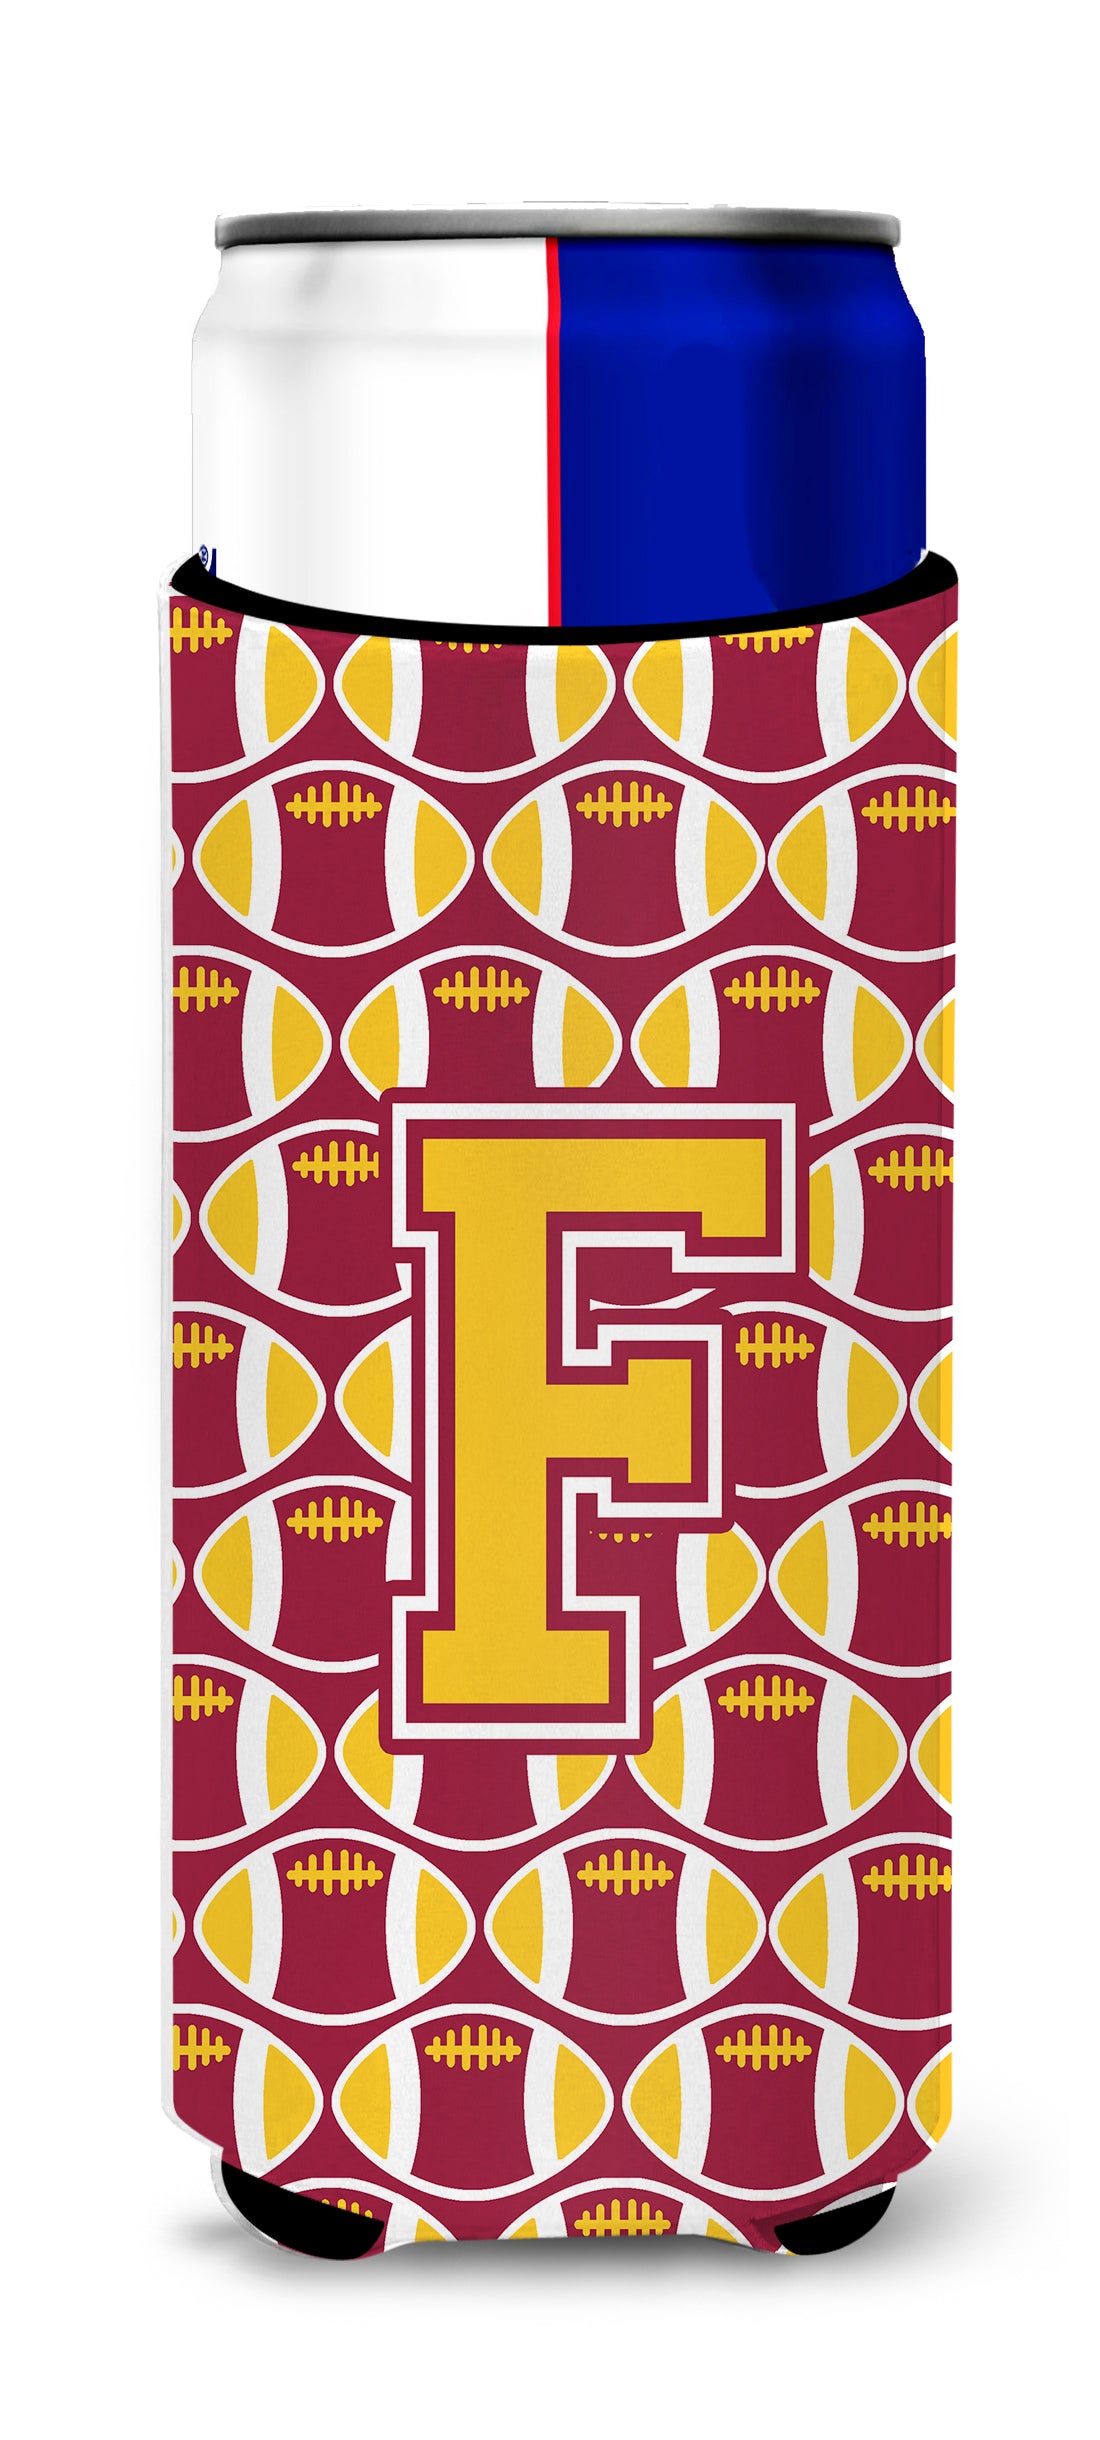 Letter F Football Maroon and Gold Ultra Beverage Insulators for slim cans CJ1081-FMUK.